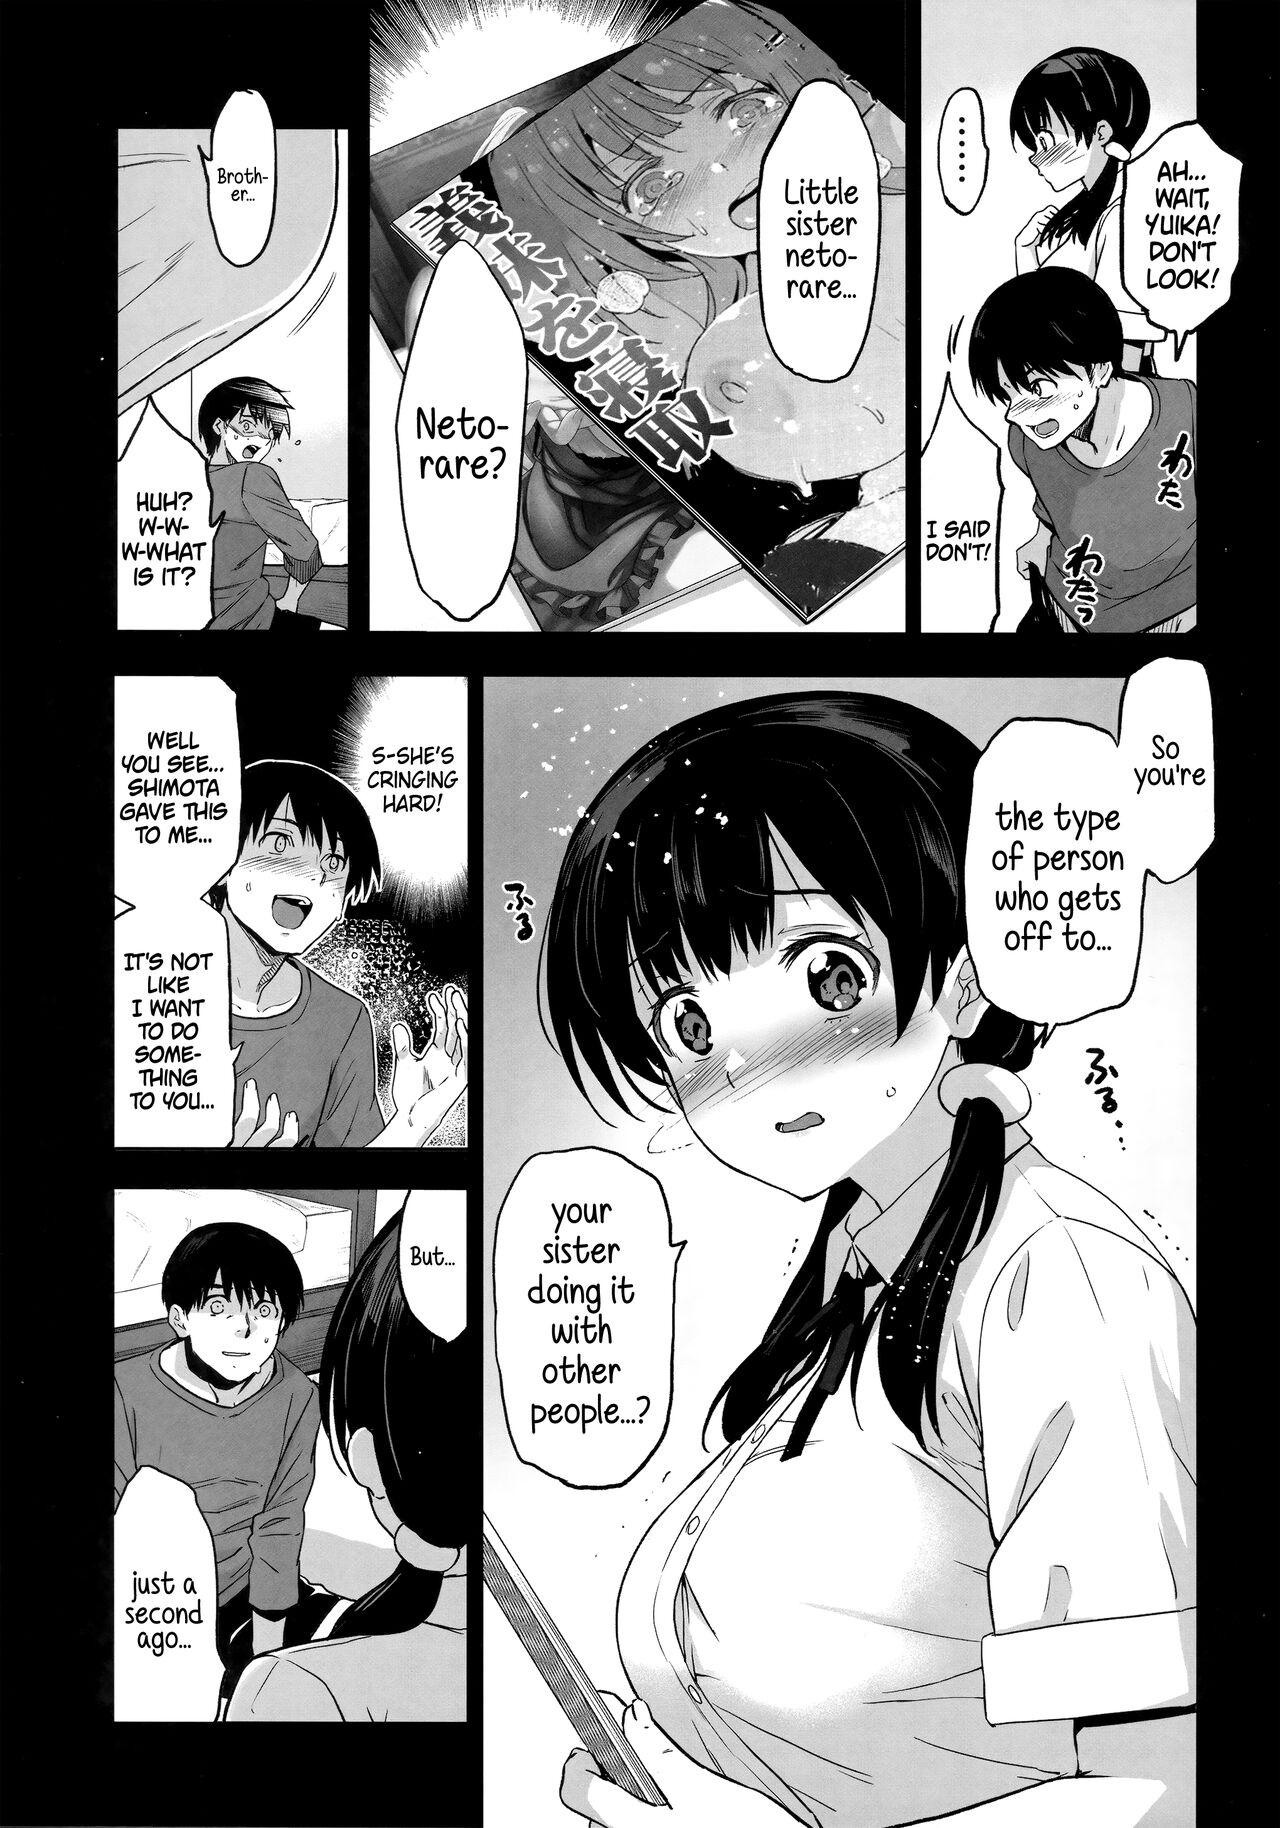 Dick Sucking Porn Imouto ga Boku ni Taninboux o Okutte kuru | My Little Sister Is Sending Me Her Videos Of Getting Fucked By Strangers - Original Funny - Page 8